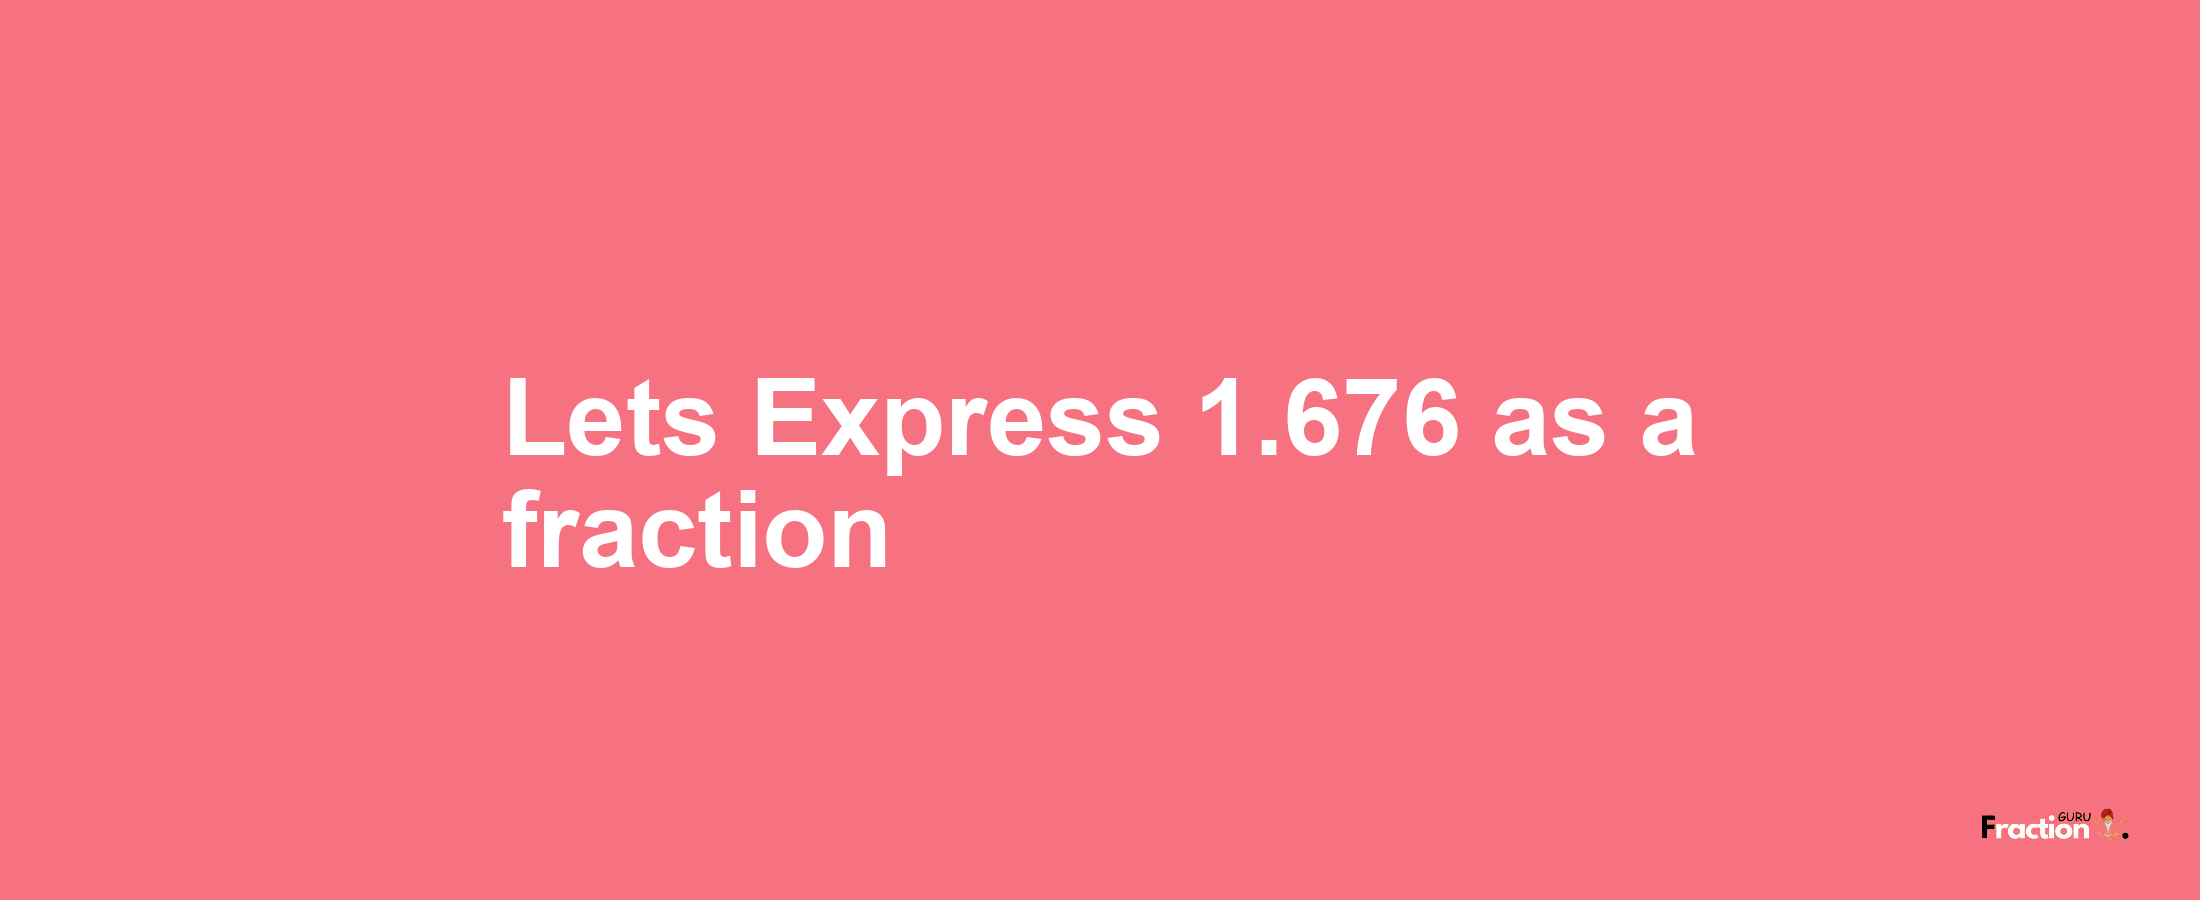 Lets Express 1.676 as afraction